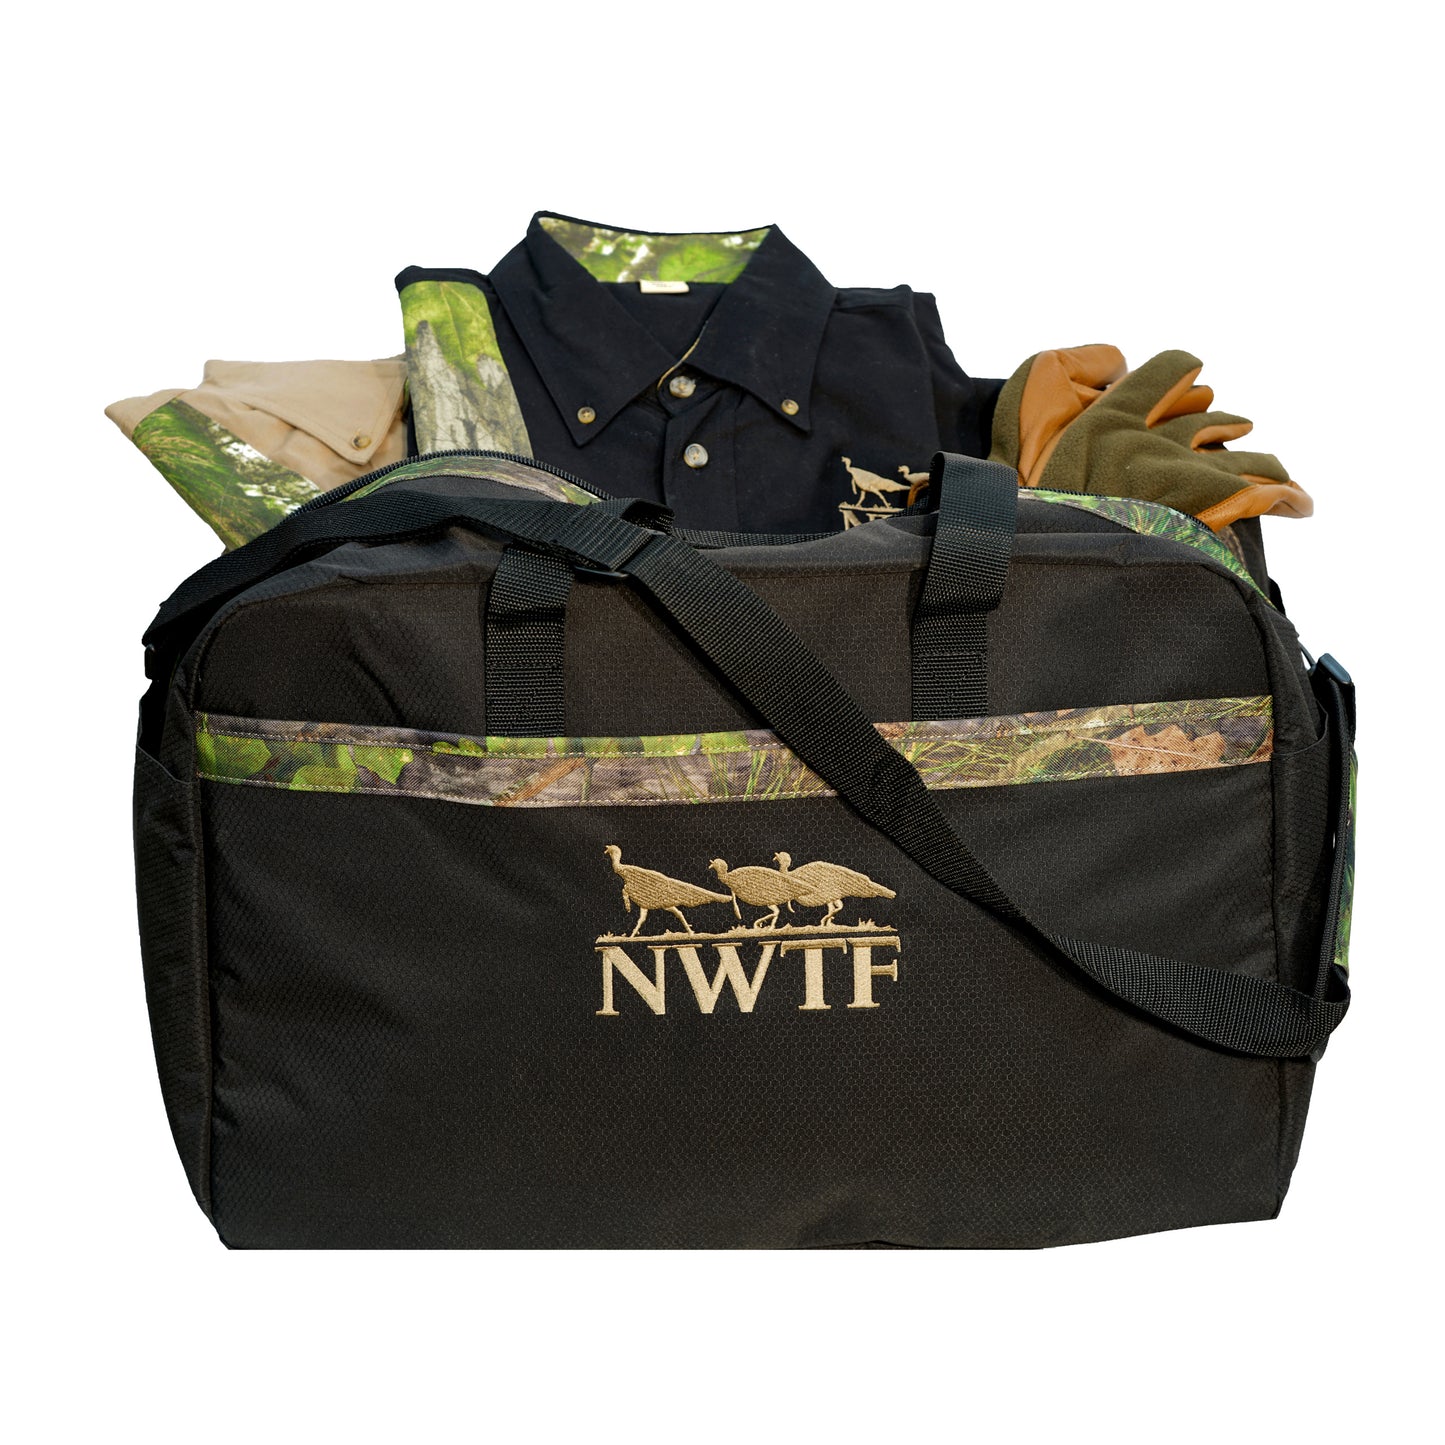 NWTF Carry-On Duffel